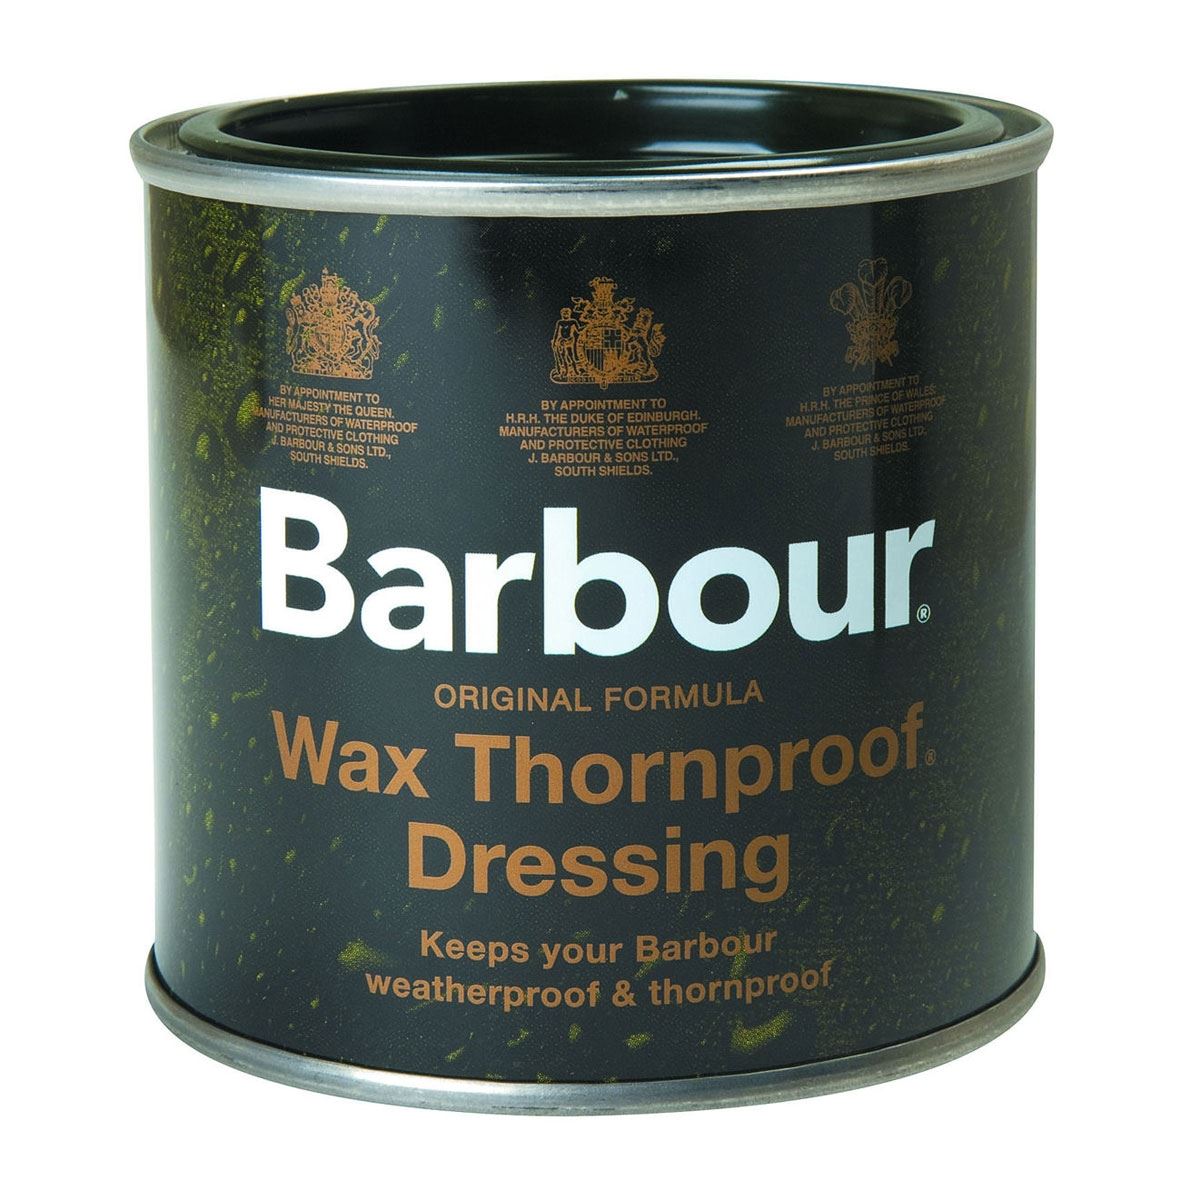 What are the constraints for ordering Barbour Wax Thornproof Dressing?